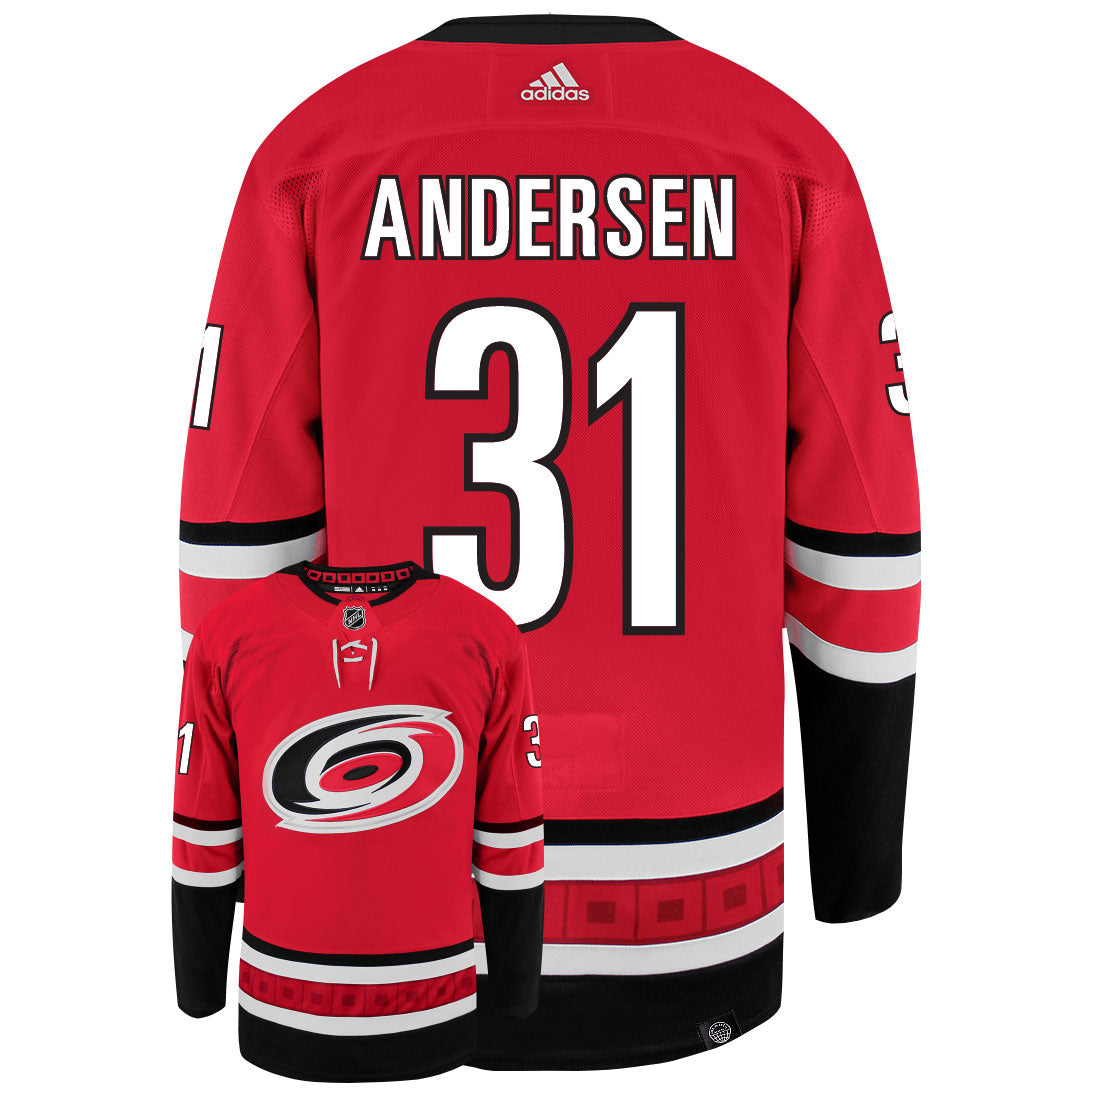 Frederik Andersen Carolina Hurricanes Adidas Primegreen Authentic Home NHL Hockey Jersey - Back/Front View